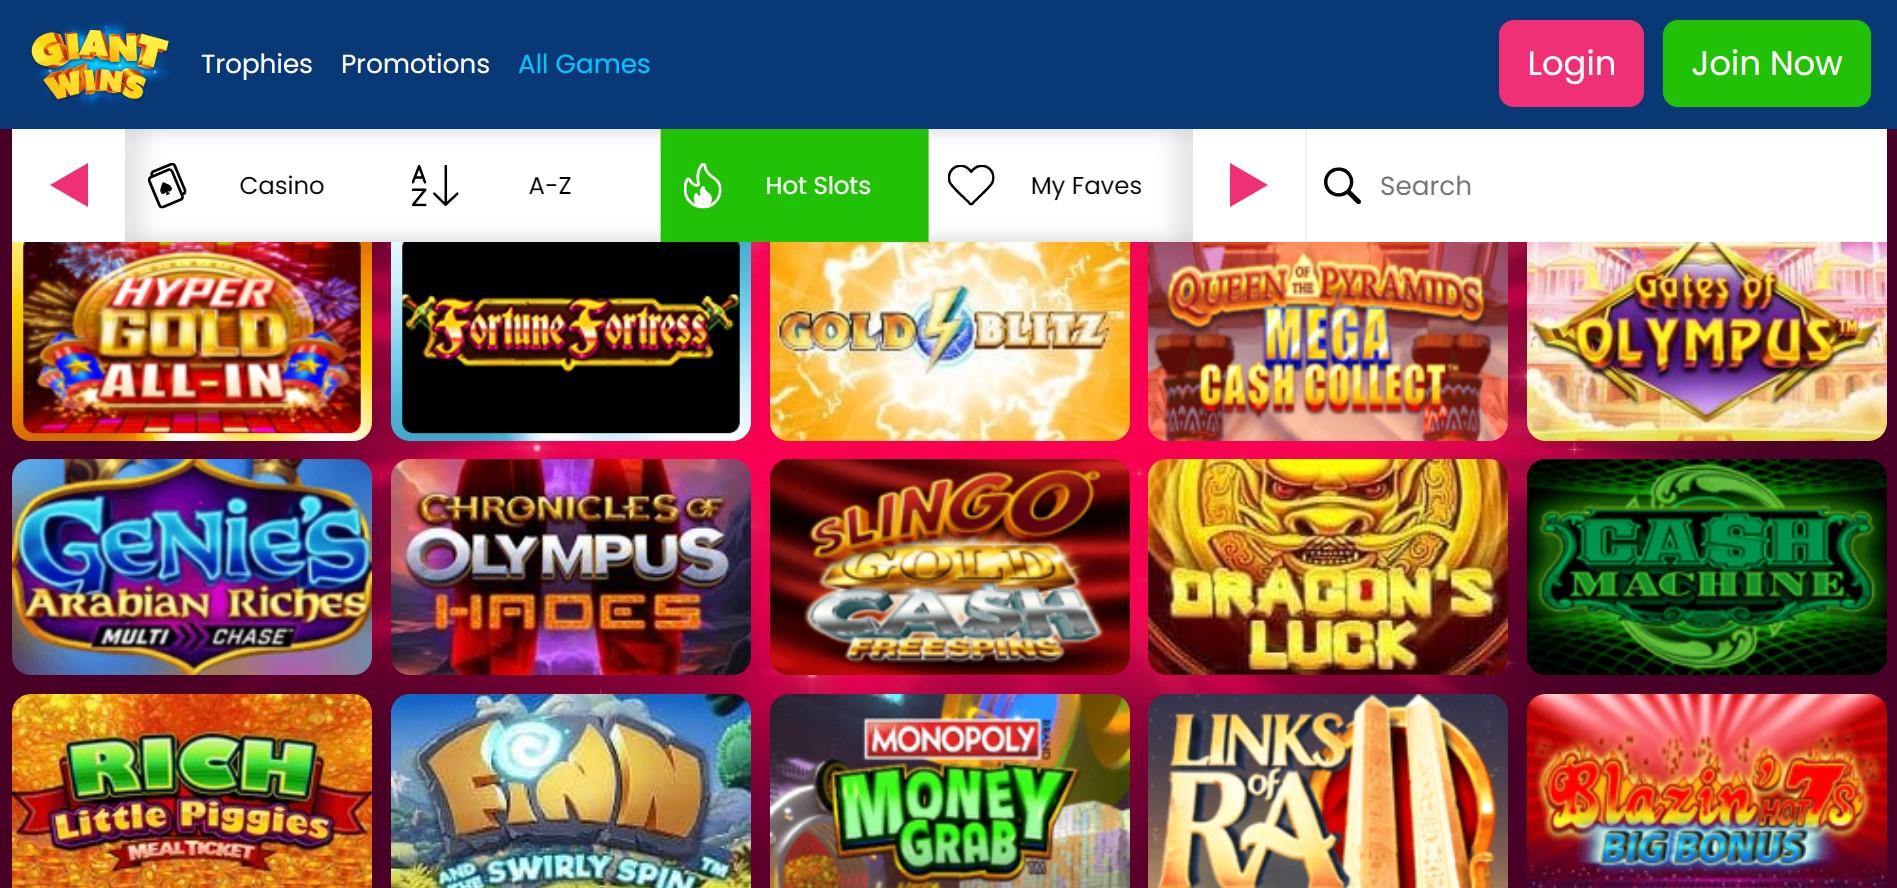 Giant Wins Casino Games Review